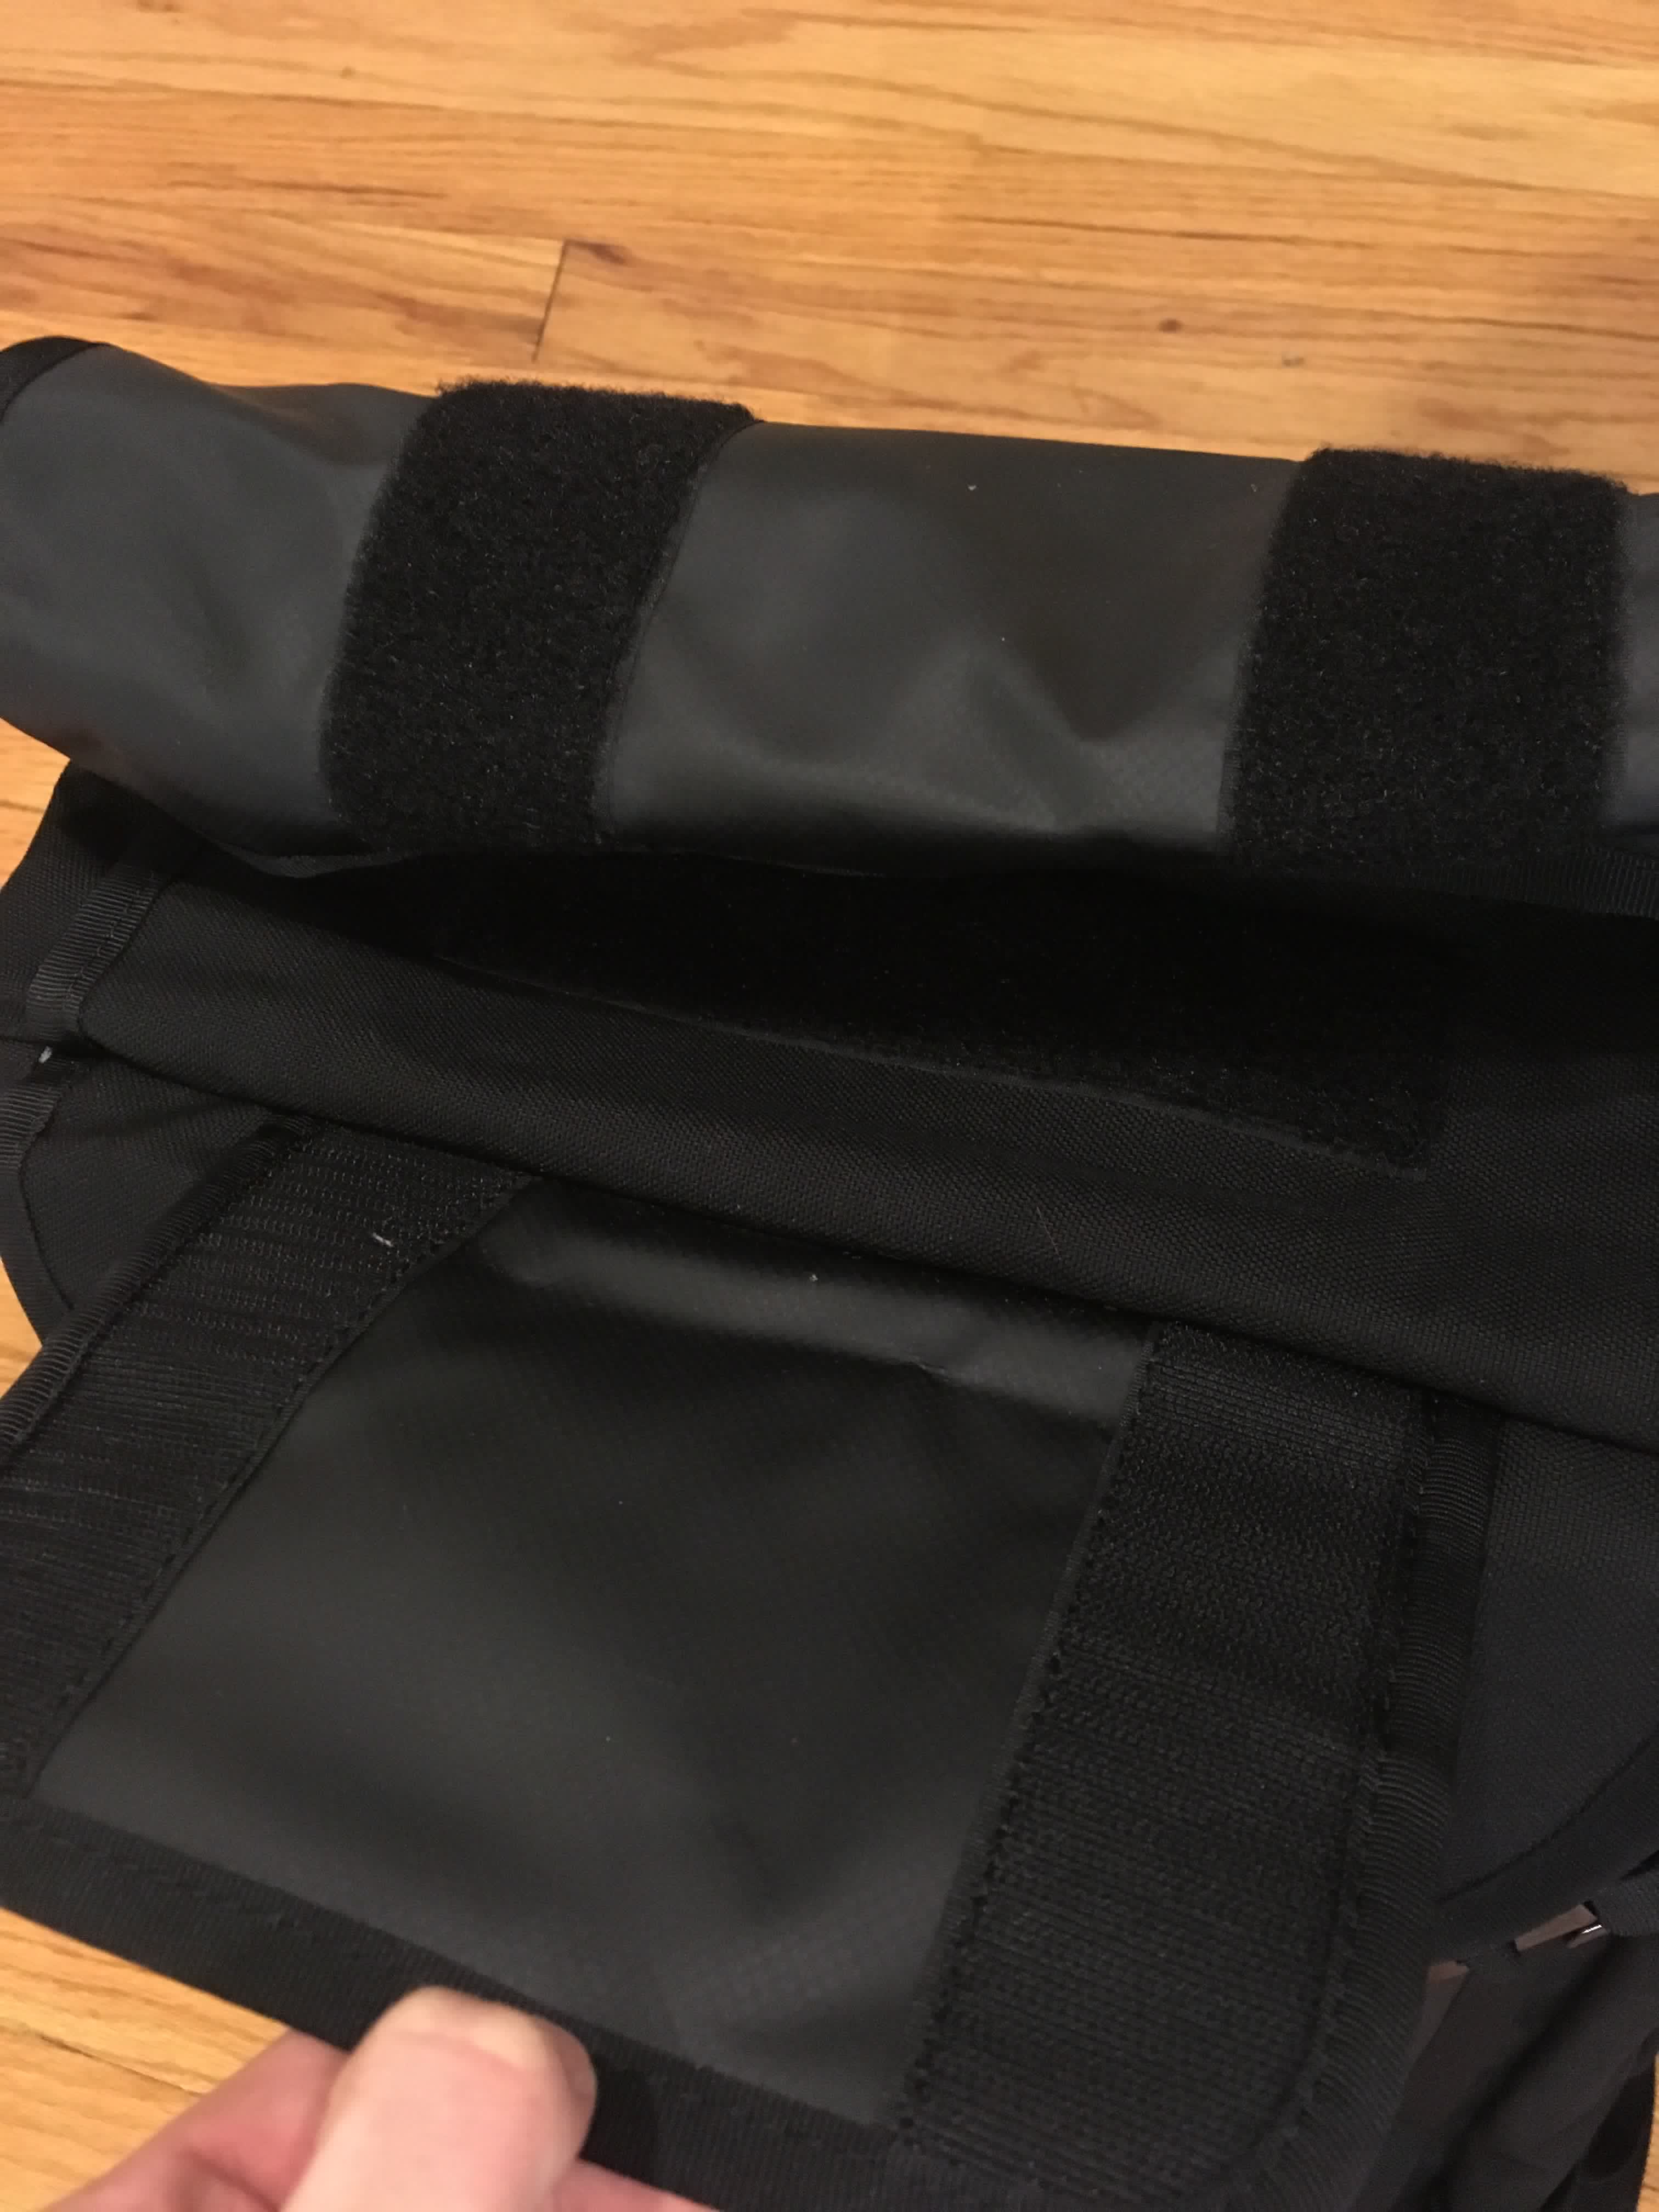 The velcro is strong, and the only way to close the rolltop flap